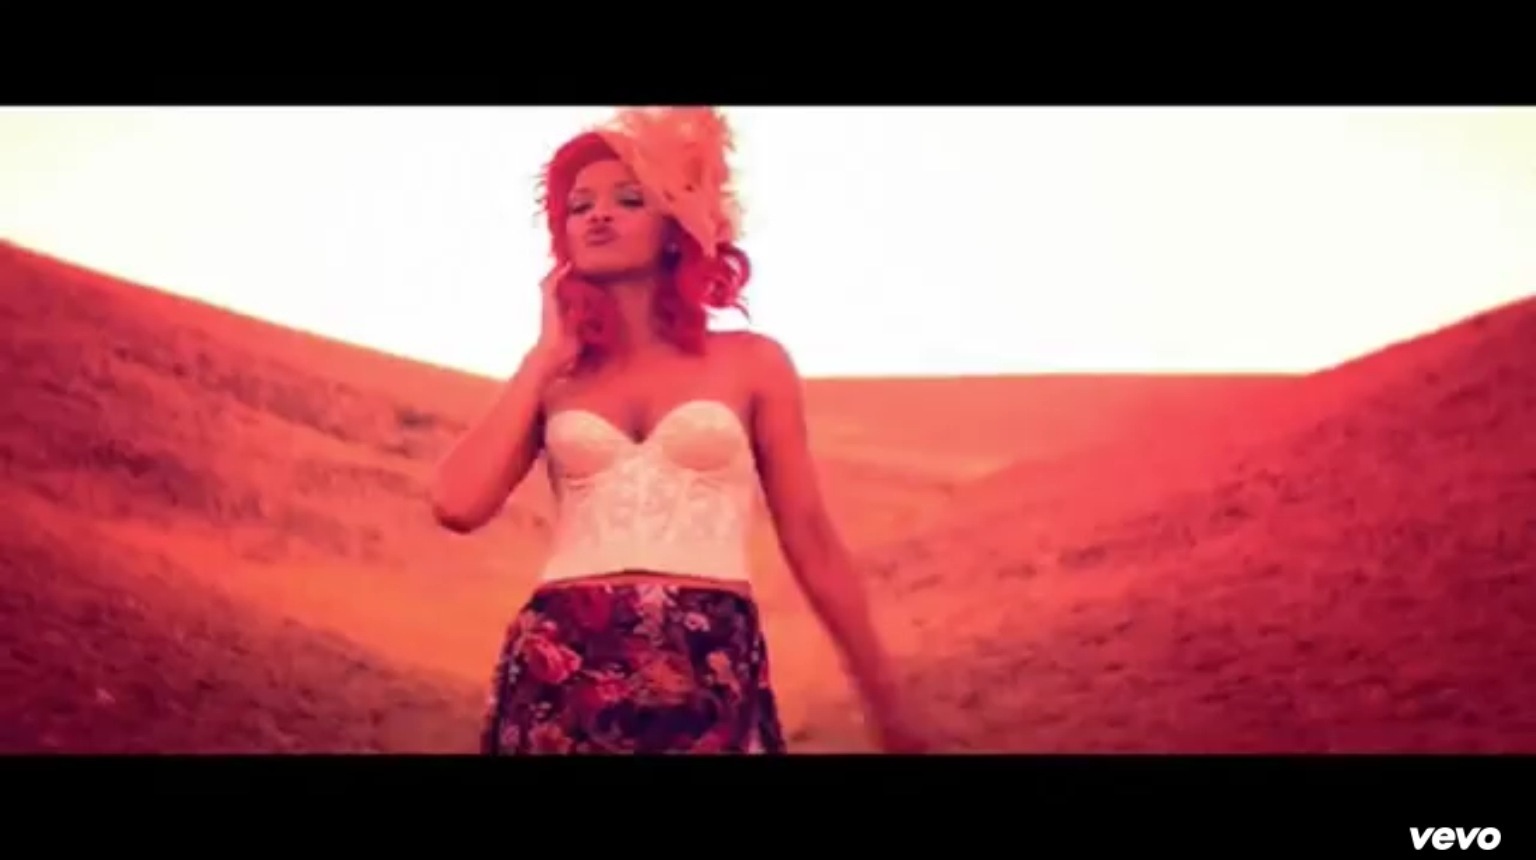 Rihanna only. Рианна Онли герл. Only girl Рианна. Rihanna Vevo'. Rihanna only girl in the World.